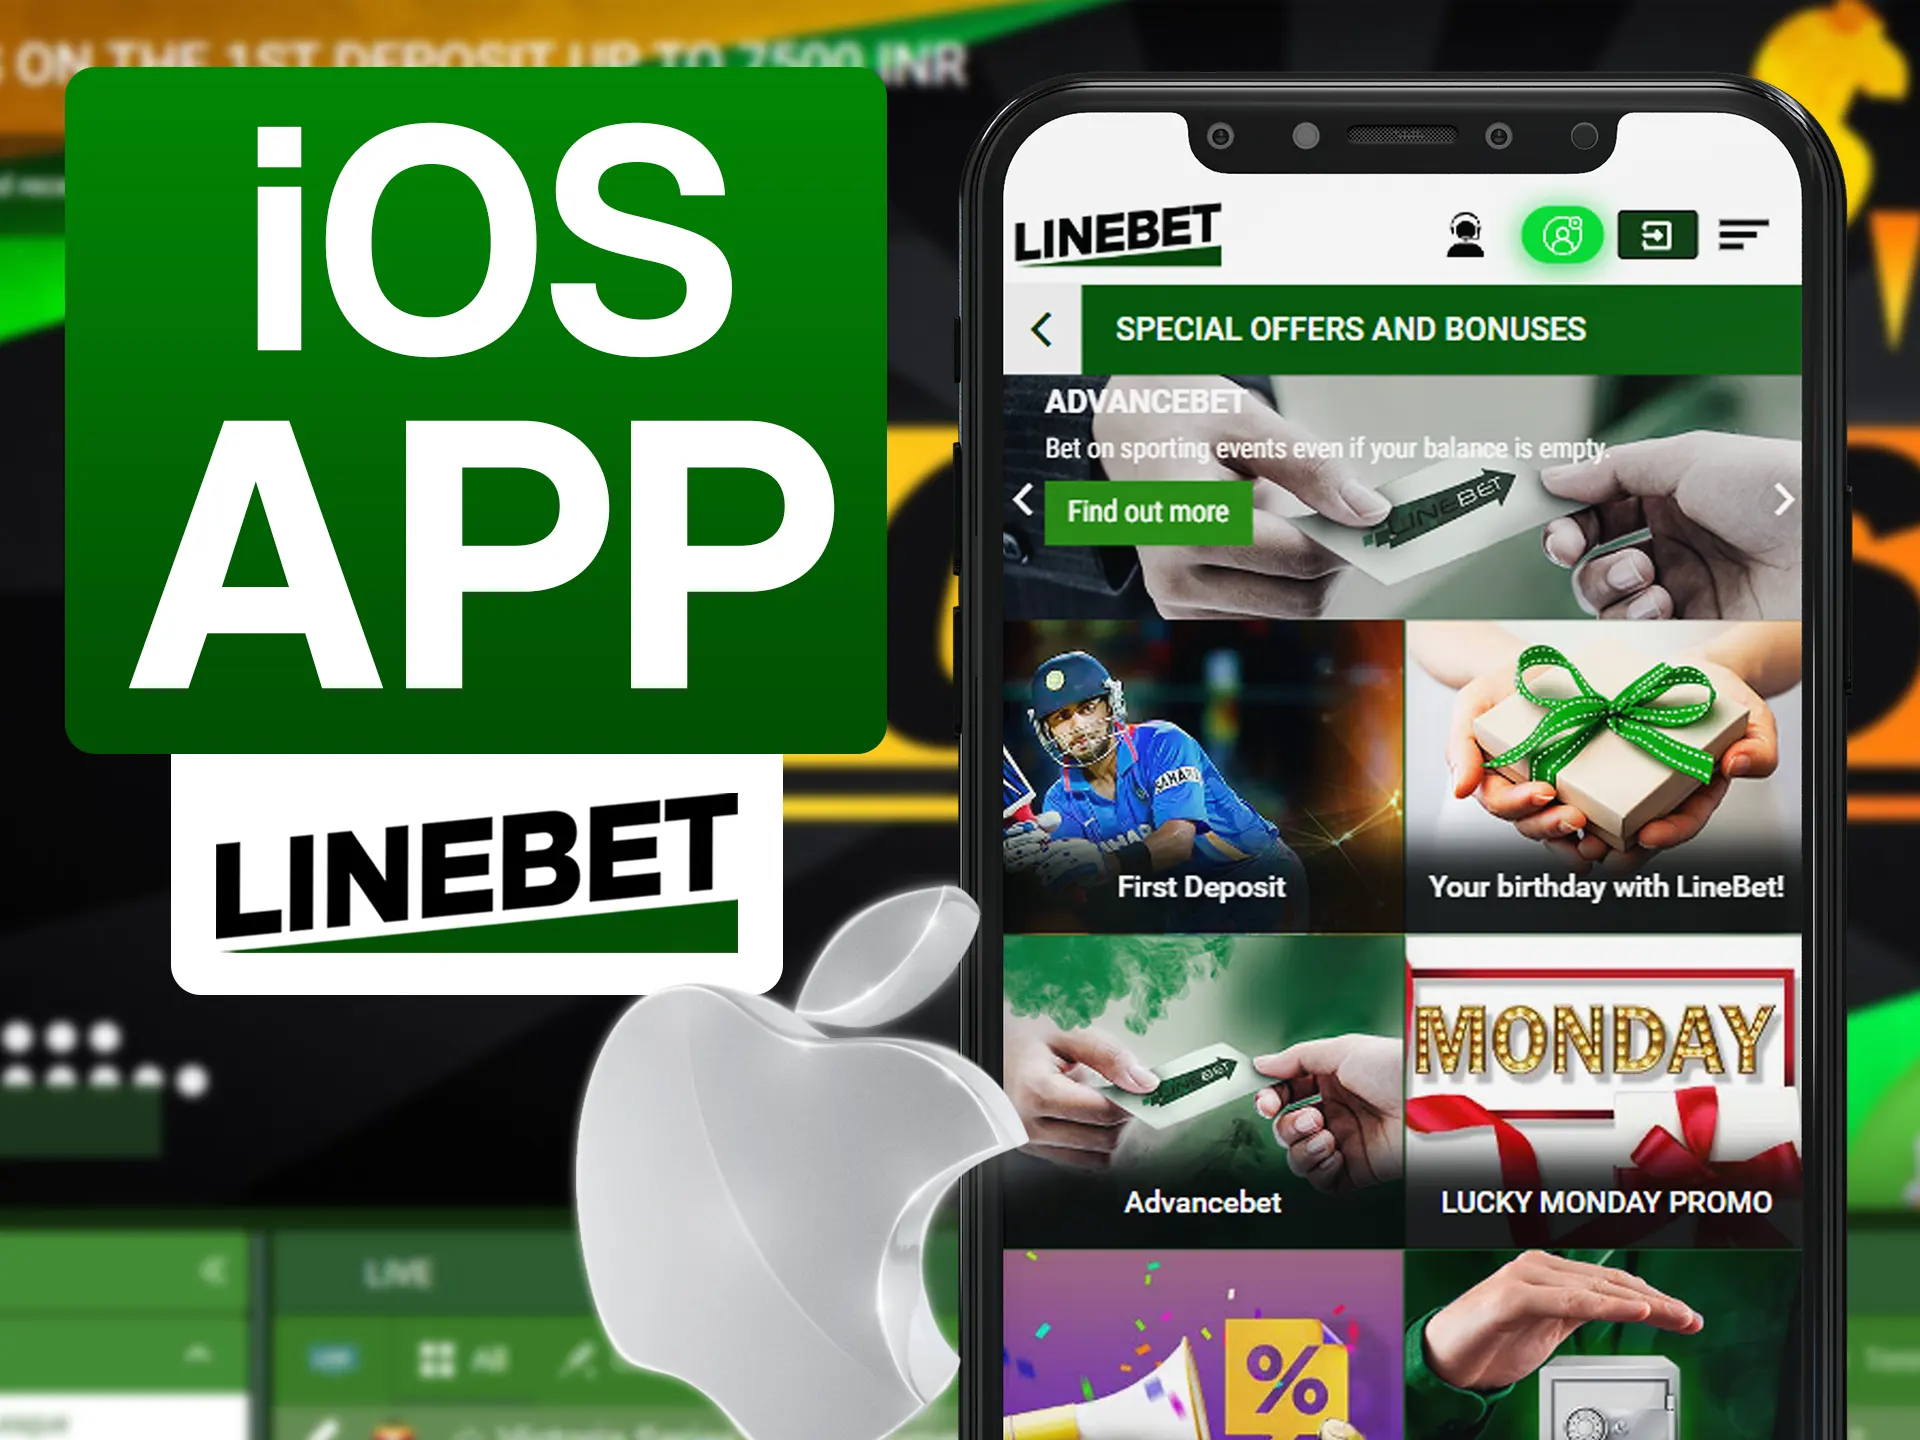 Install Linebet iOS app on all of your devices..